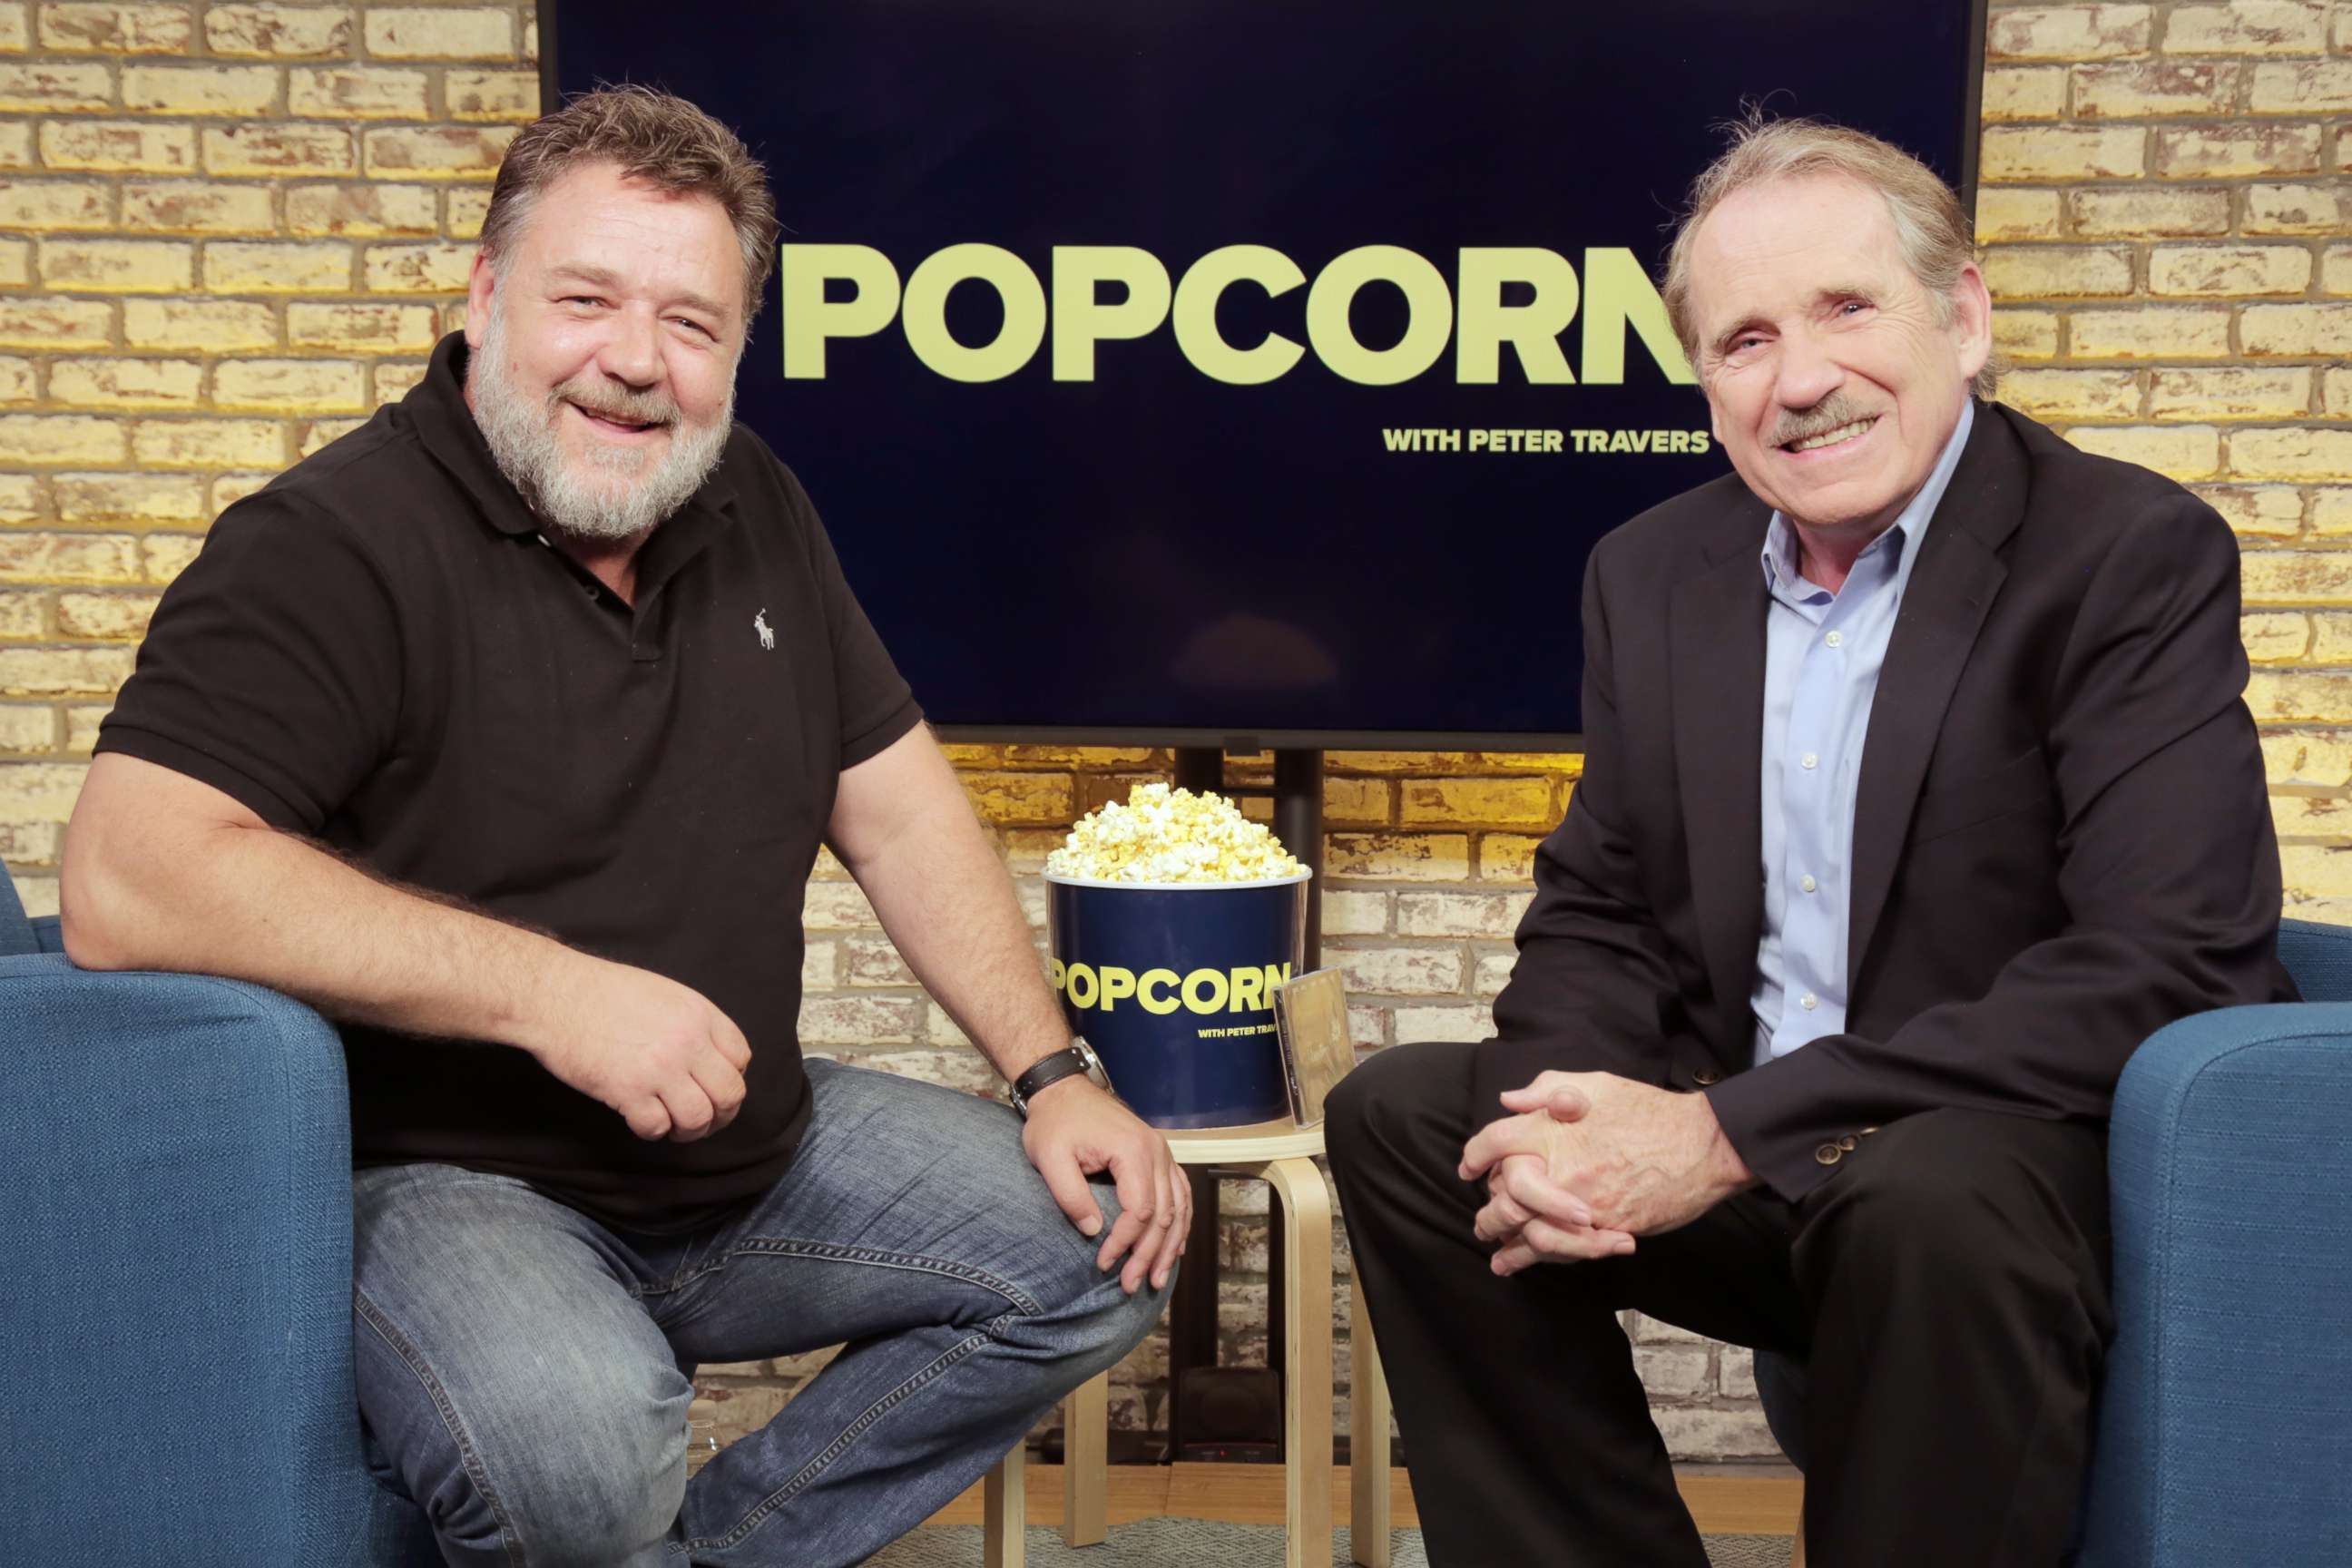 PHOTO: Russell Crowe appears on "Popcorn with Peter Travers" at ABC News studios, June 20, 2019.